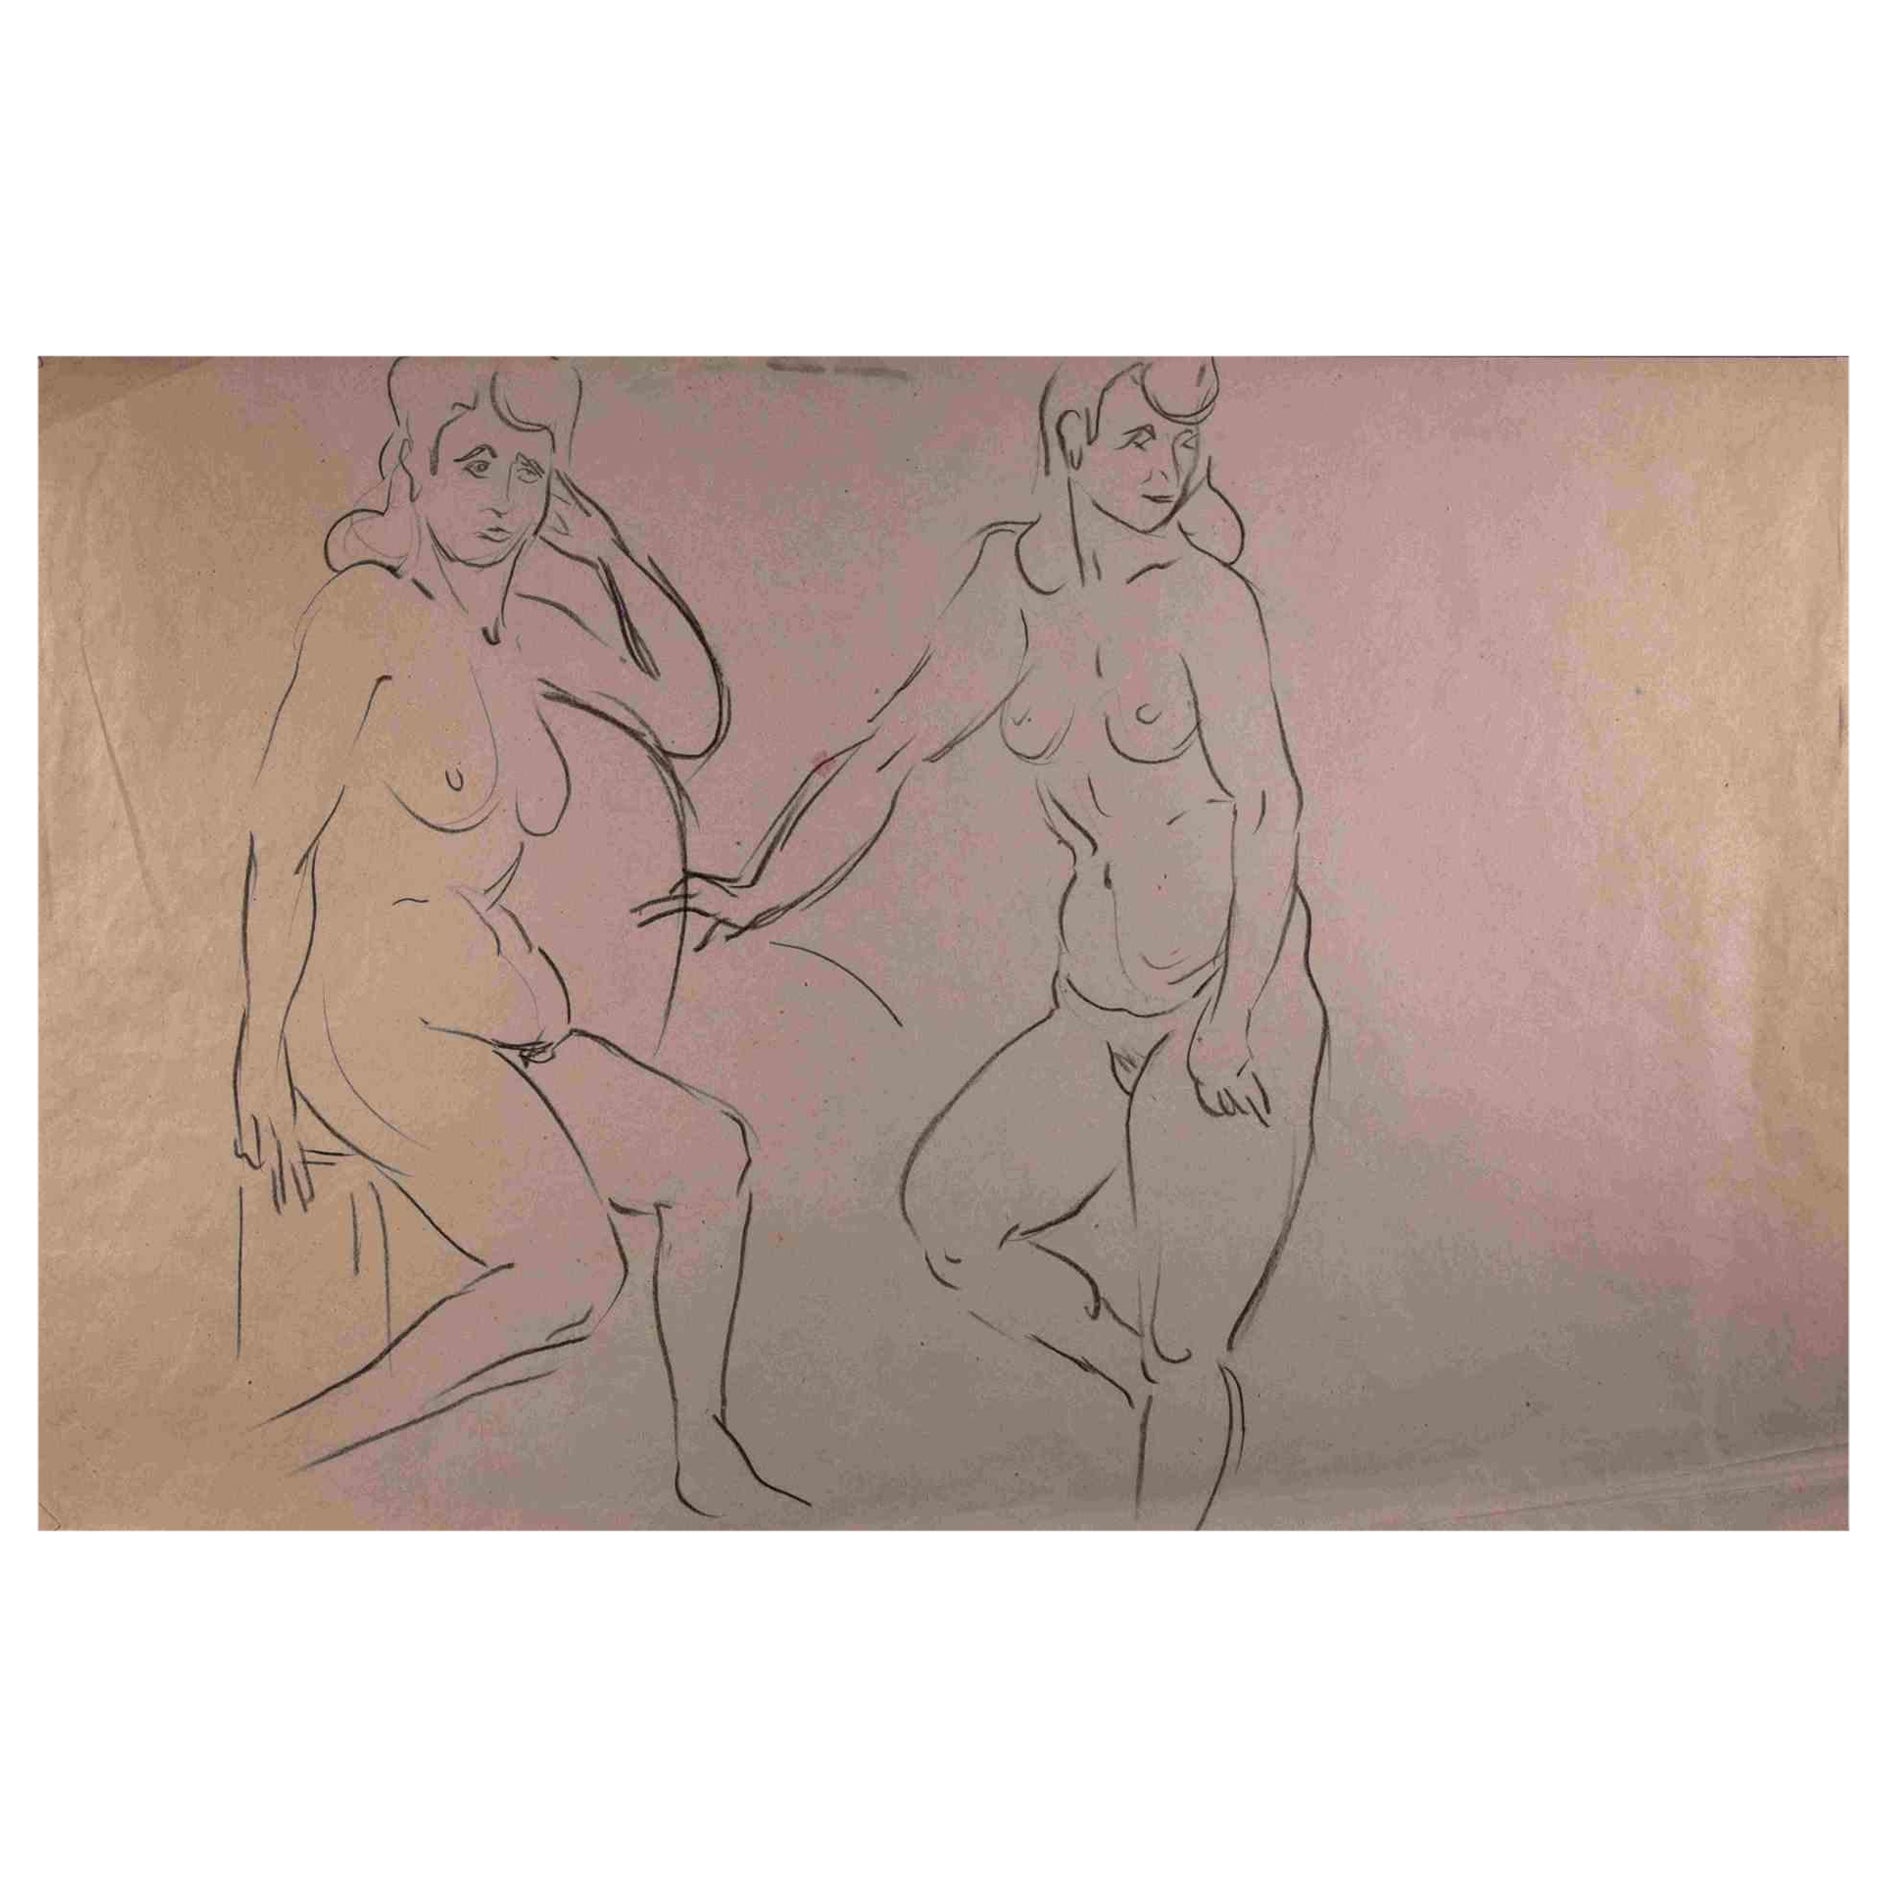 Unknown Figurative Art - Nudes - Original Pencil Drawing on Paper - Mid 20th Century